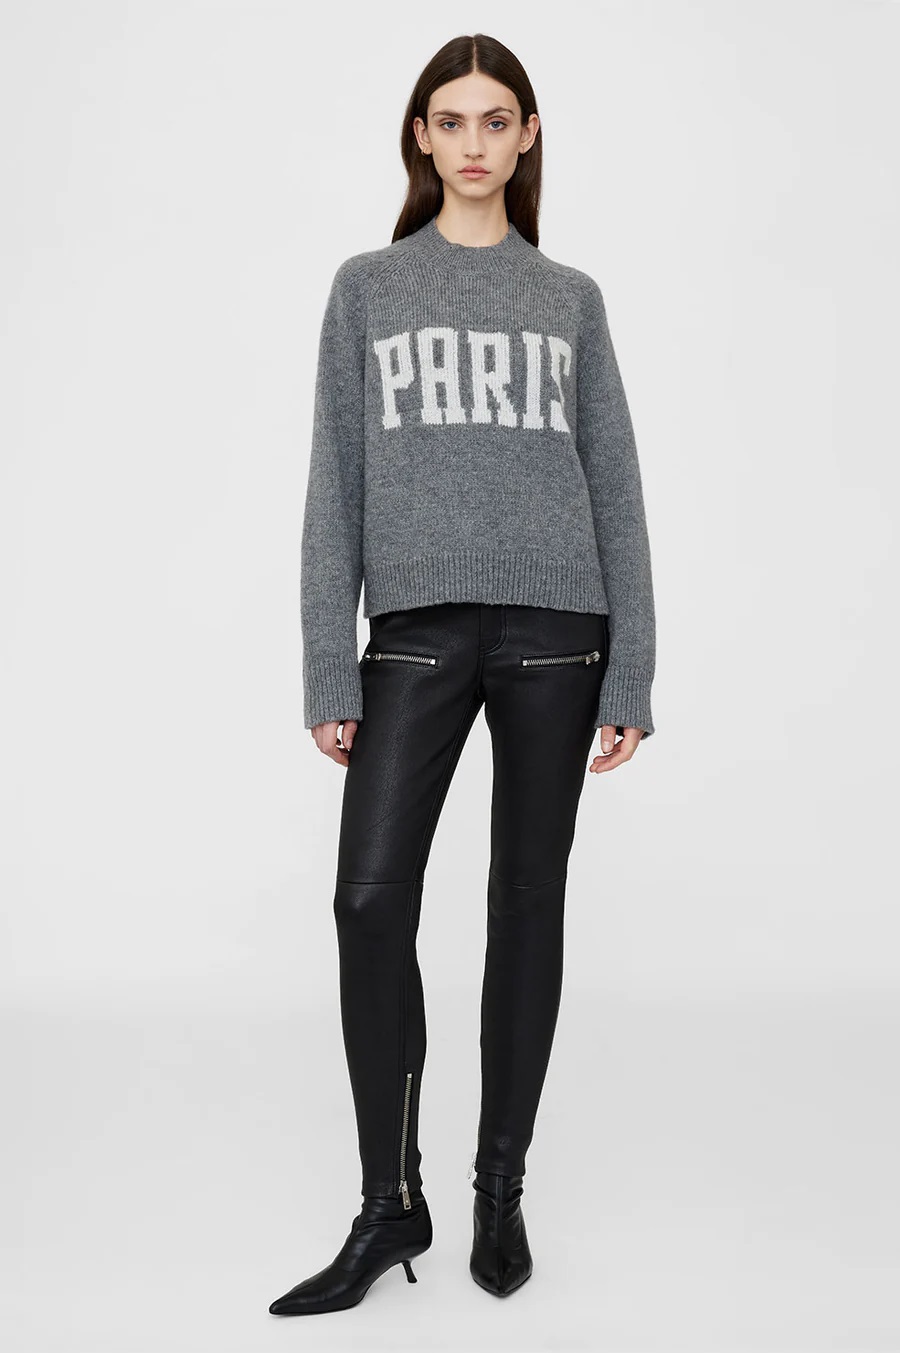 ANINE BING Kendrick Knit Sweater Paris in Charcoal S